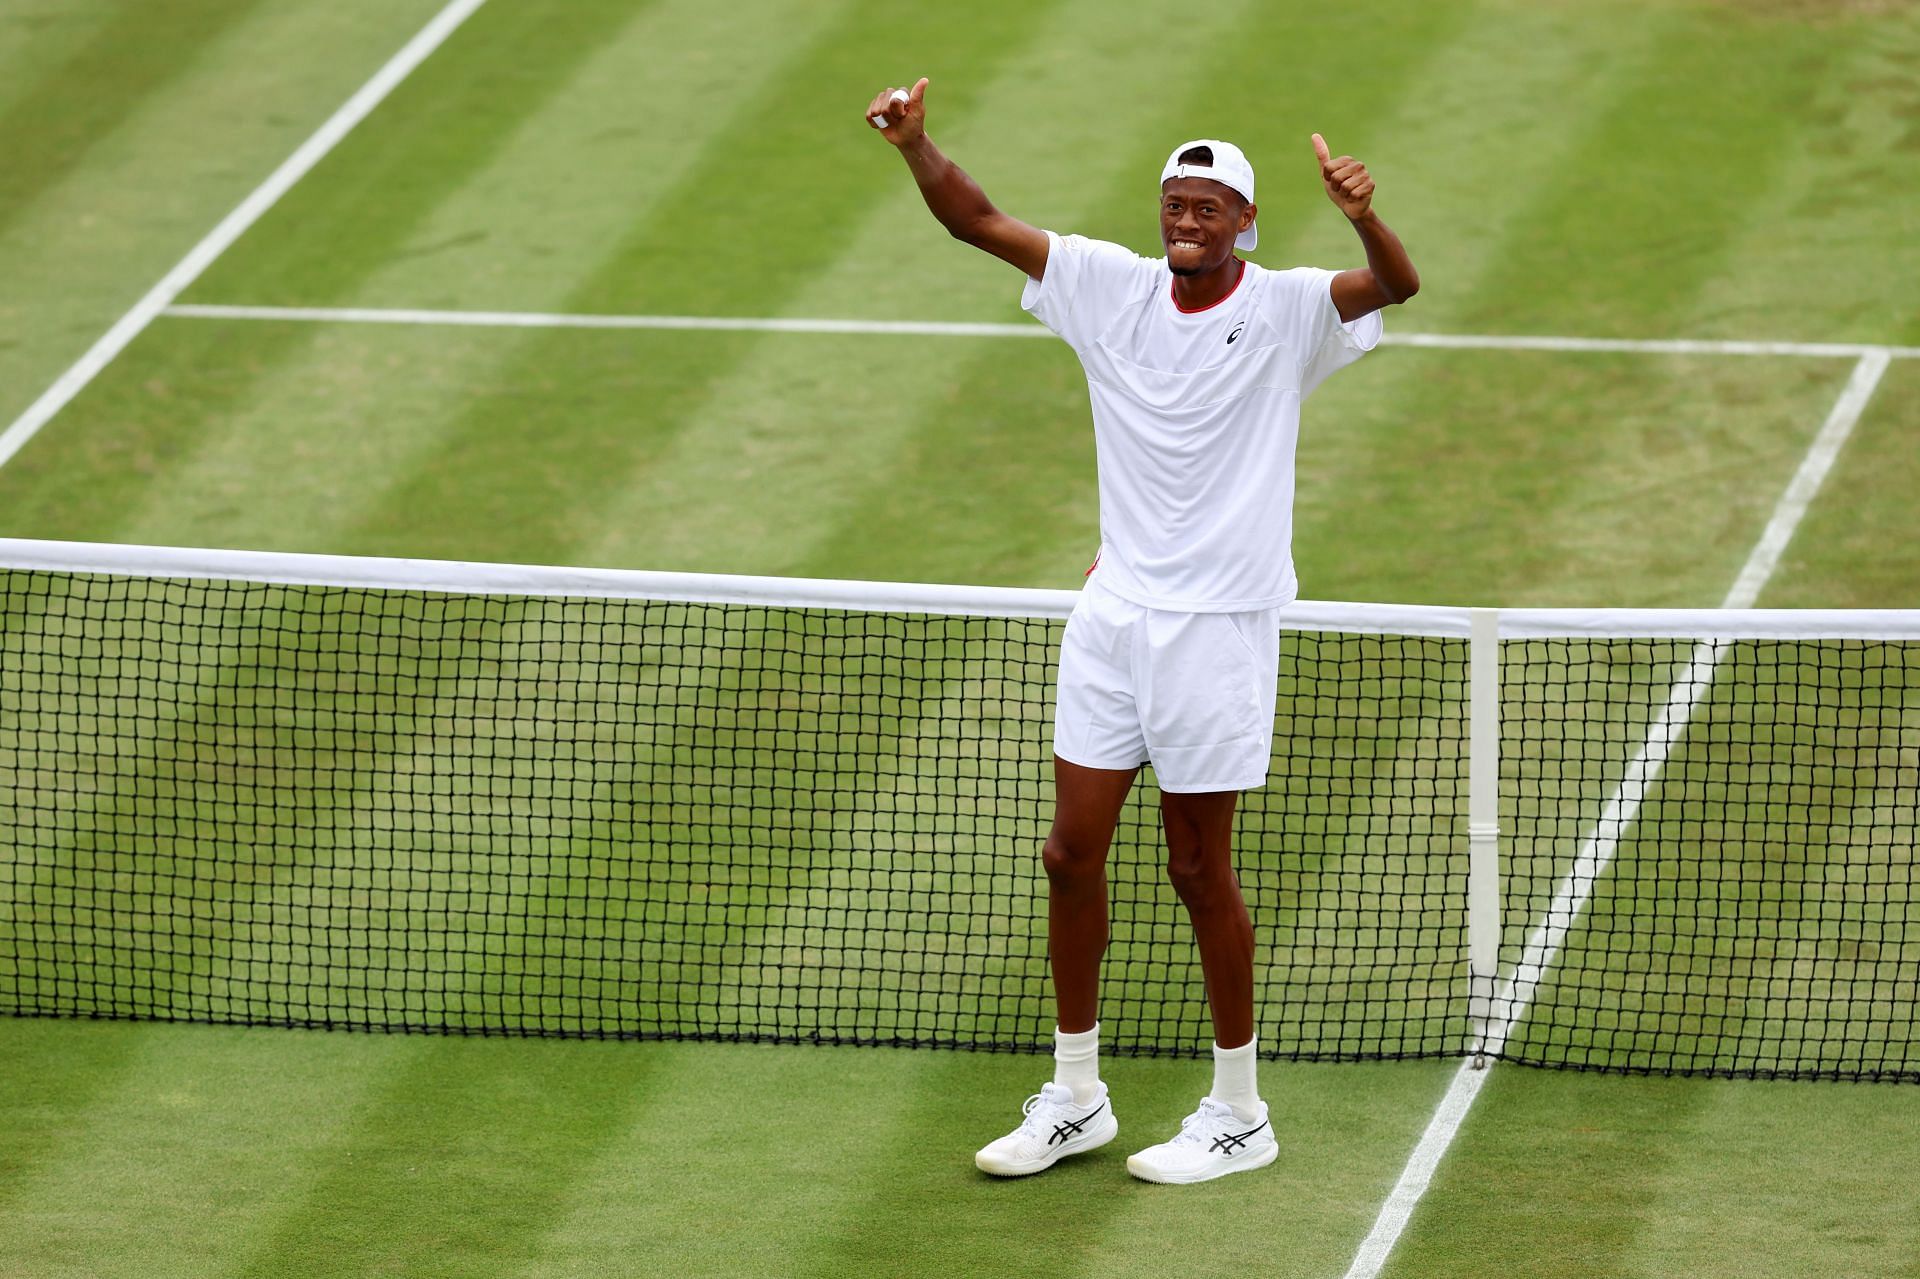 Christopher Eubanks in the Championships - Wimbledon 2023